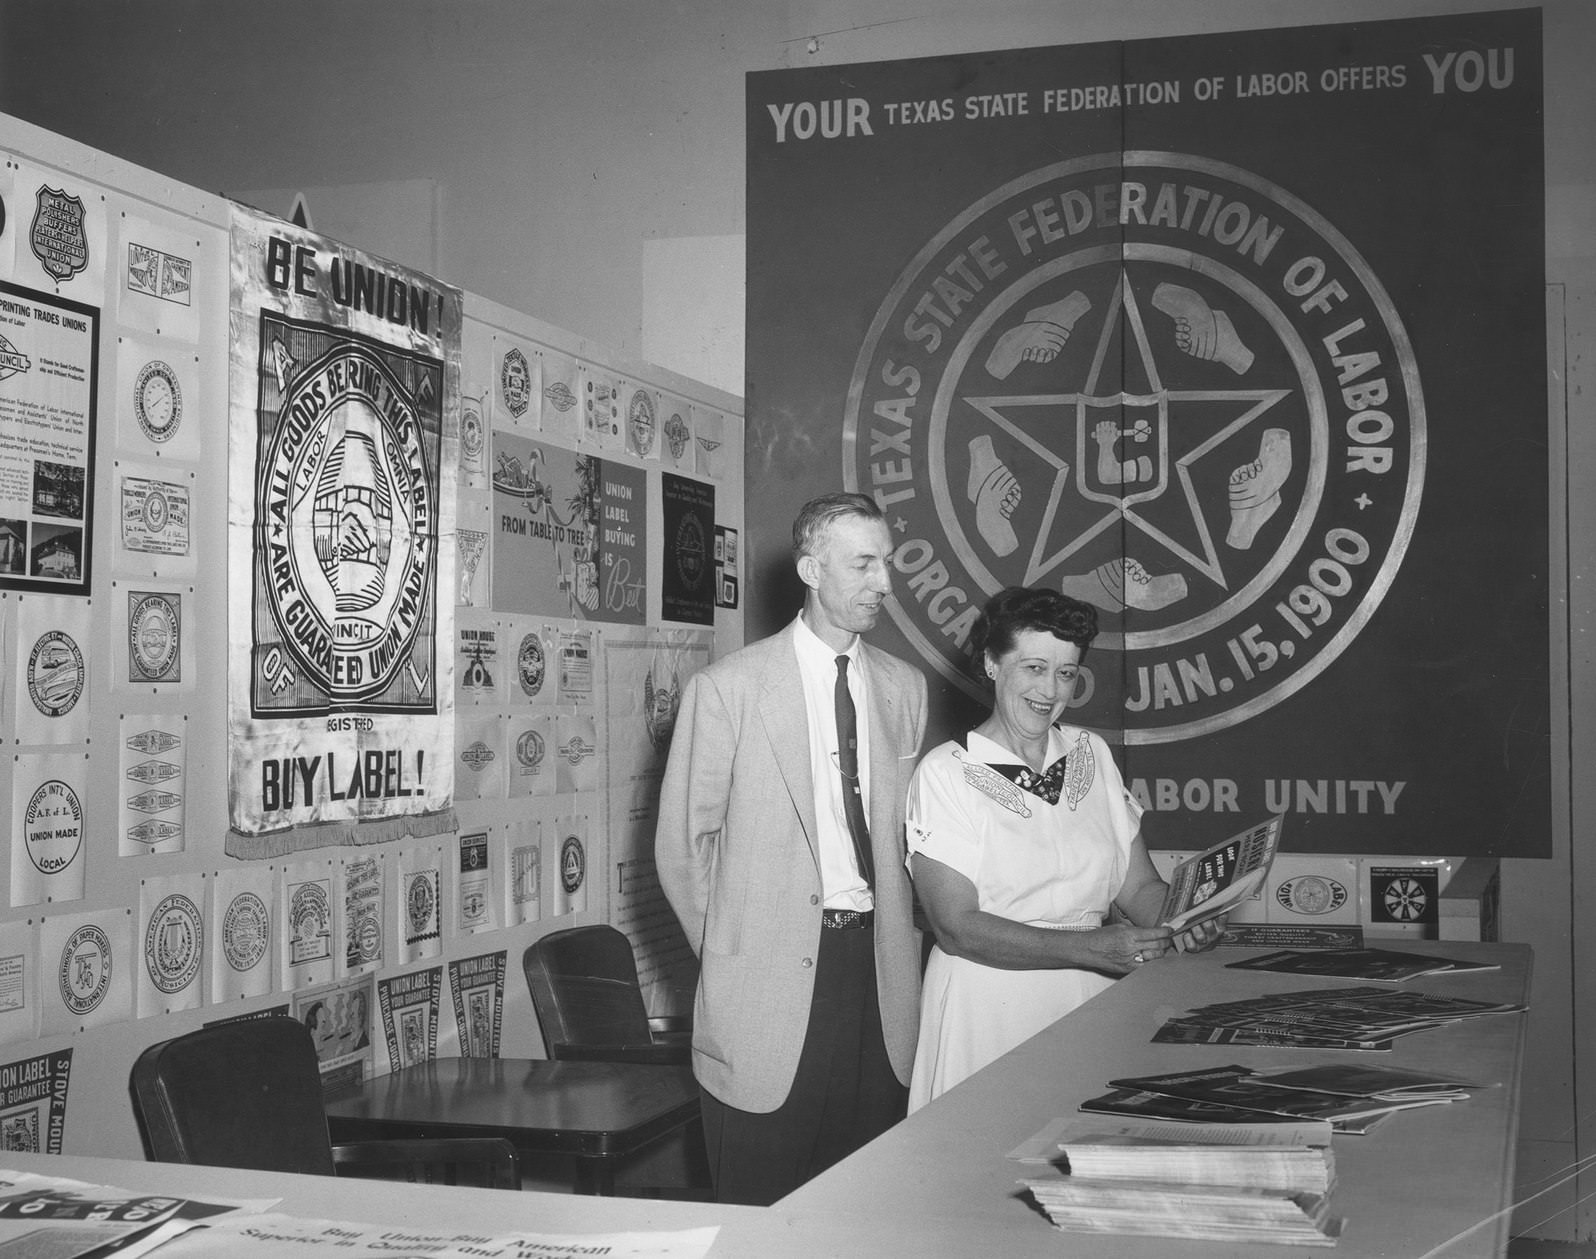 John "Preacher" Hays and an Unidentified Woman, 1954